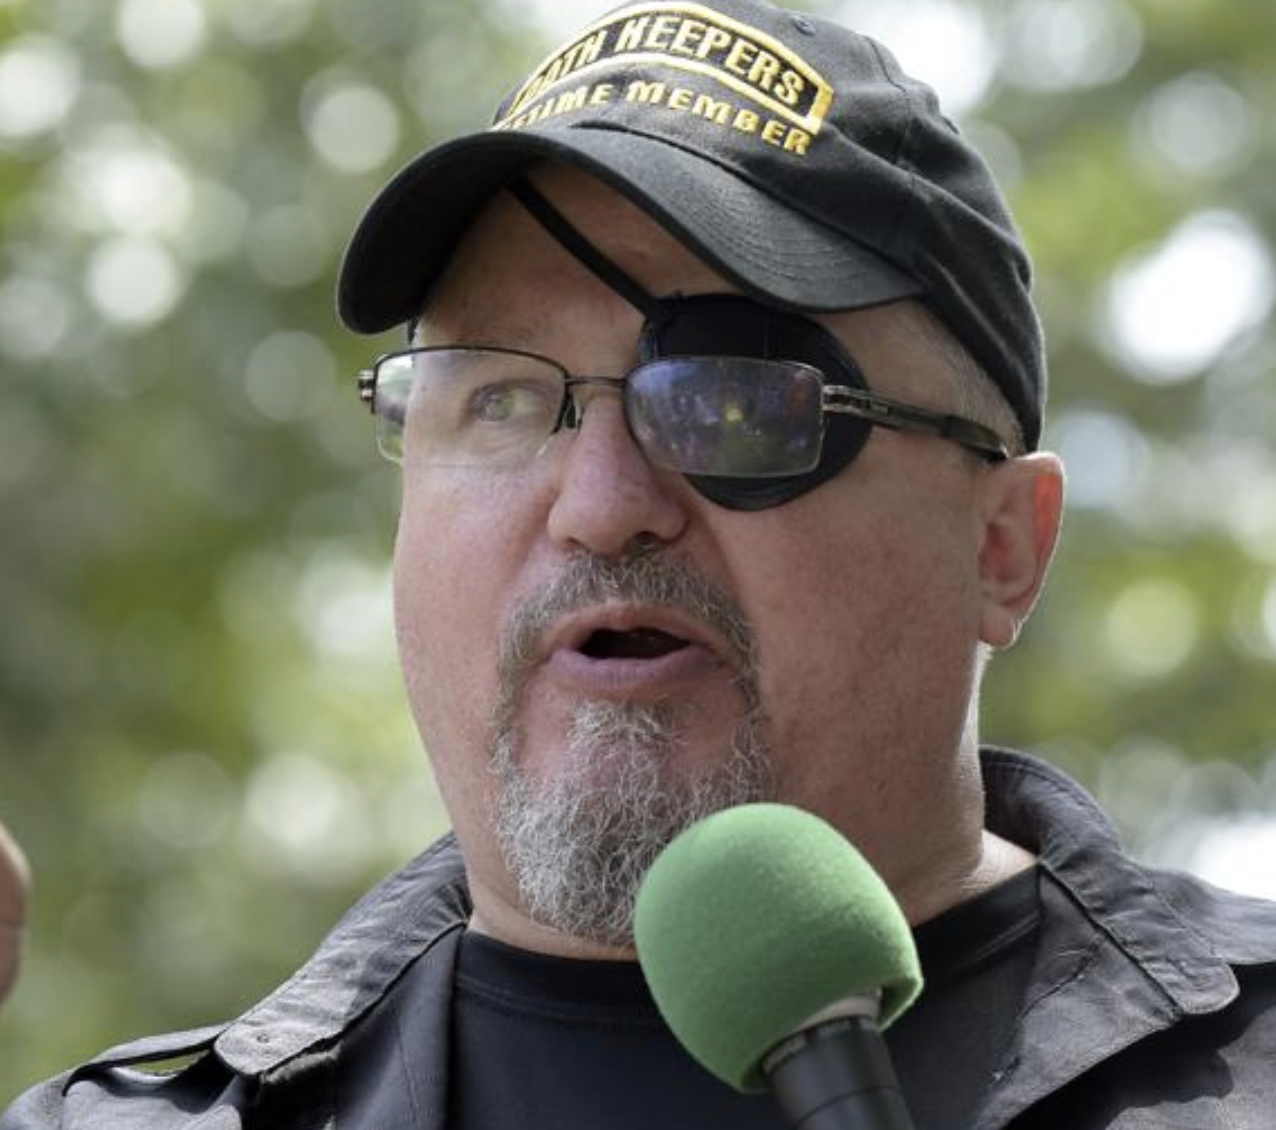 FILE - Stewart Rhodes, founder of the citizen militia group known as the Oath Keepers speaks during a rally outside the White House in Washington, on June 25, 2017. The seditious conspiracy trial against Rhodes and four associates is raising fresh questions about intelligence failures in the run-up to Jan. 6, 2021, that appear to have allowed Rhodes’ antigovernment group and other extremists to mobilize in plain sight. (AP Photo/Susan Walsh, File)